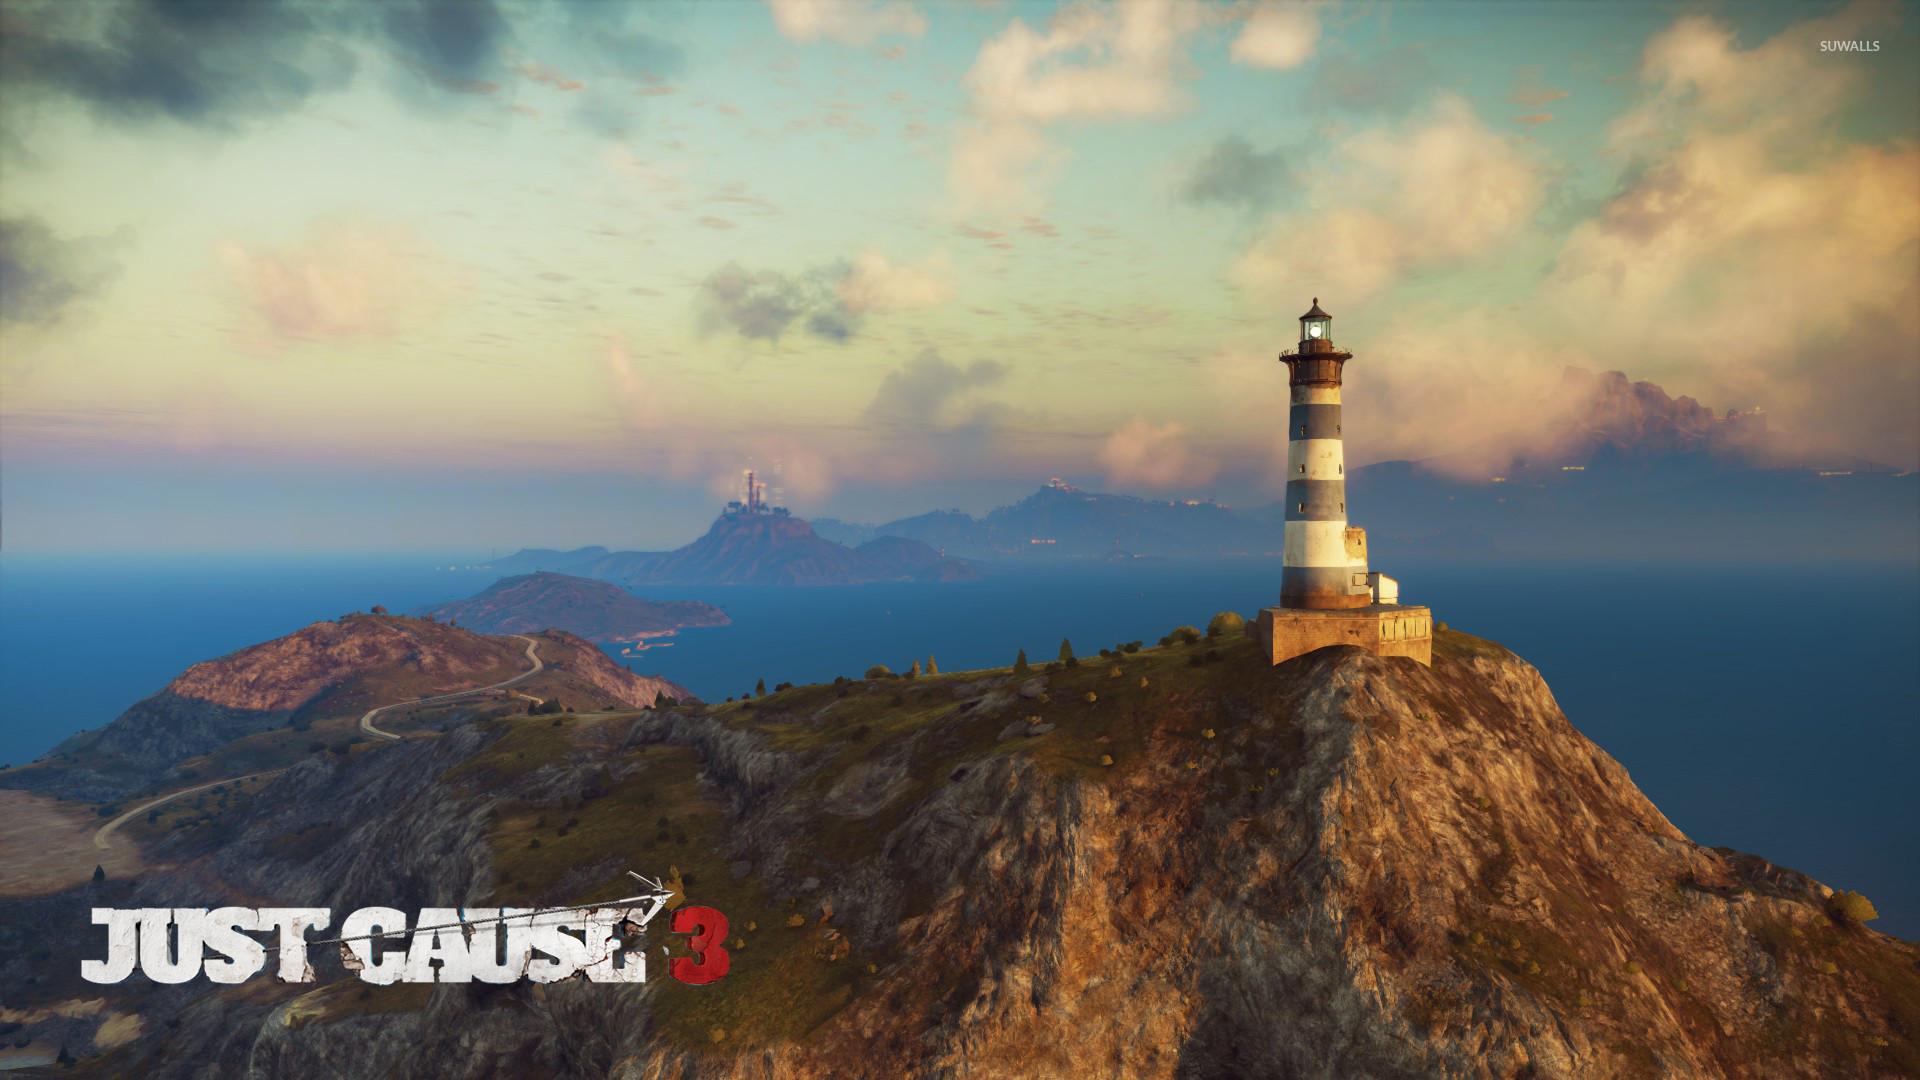 1920x1080 Lighthouse in Medici - Just Cause 3 wallpaper